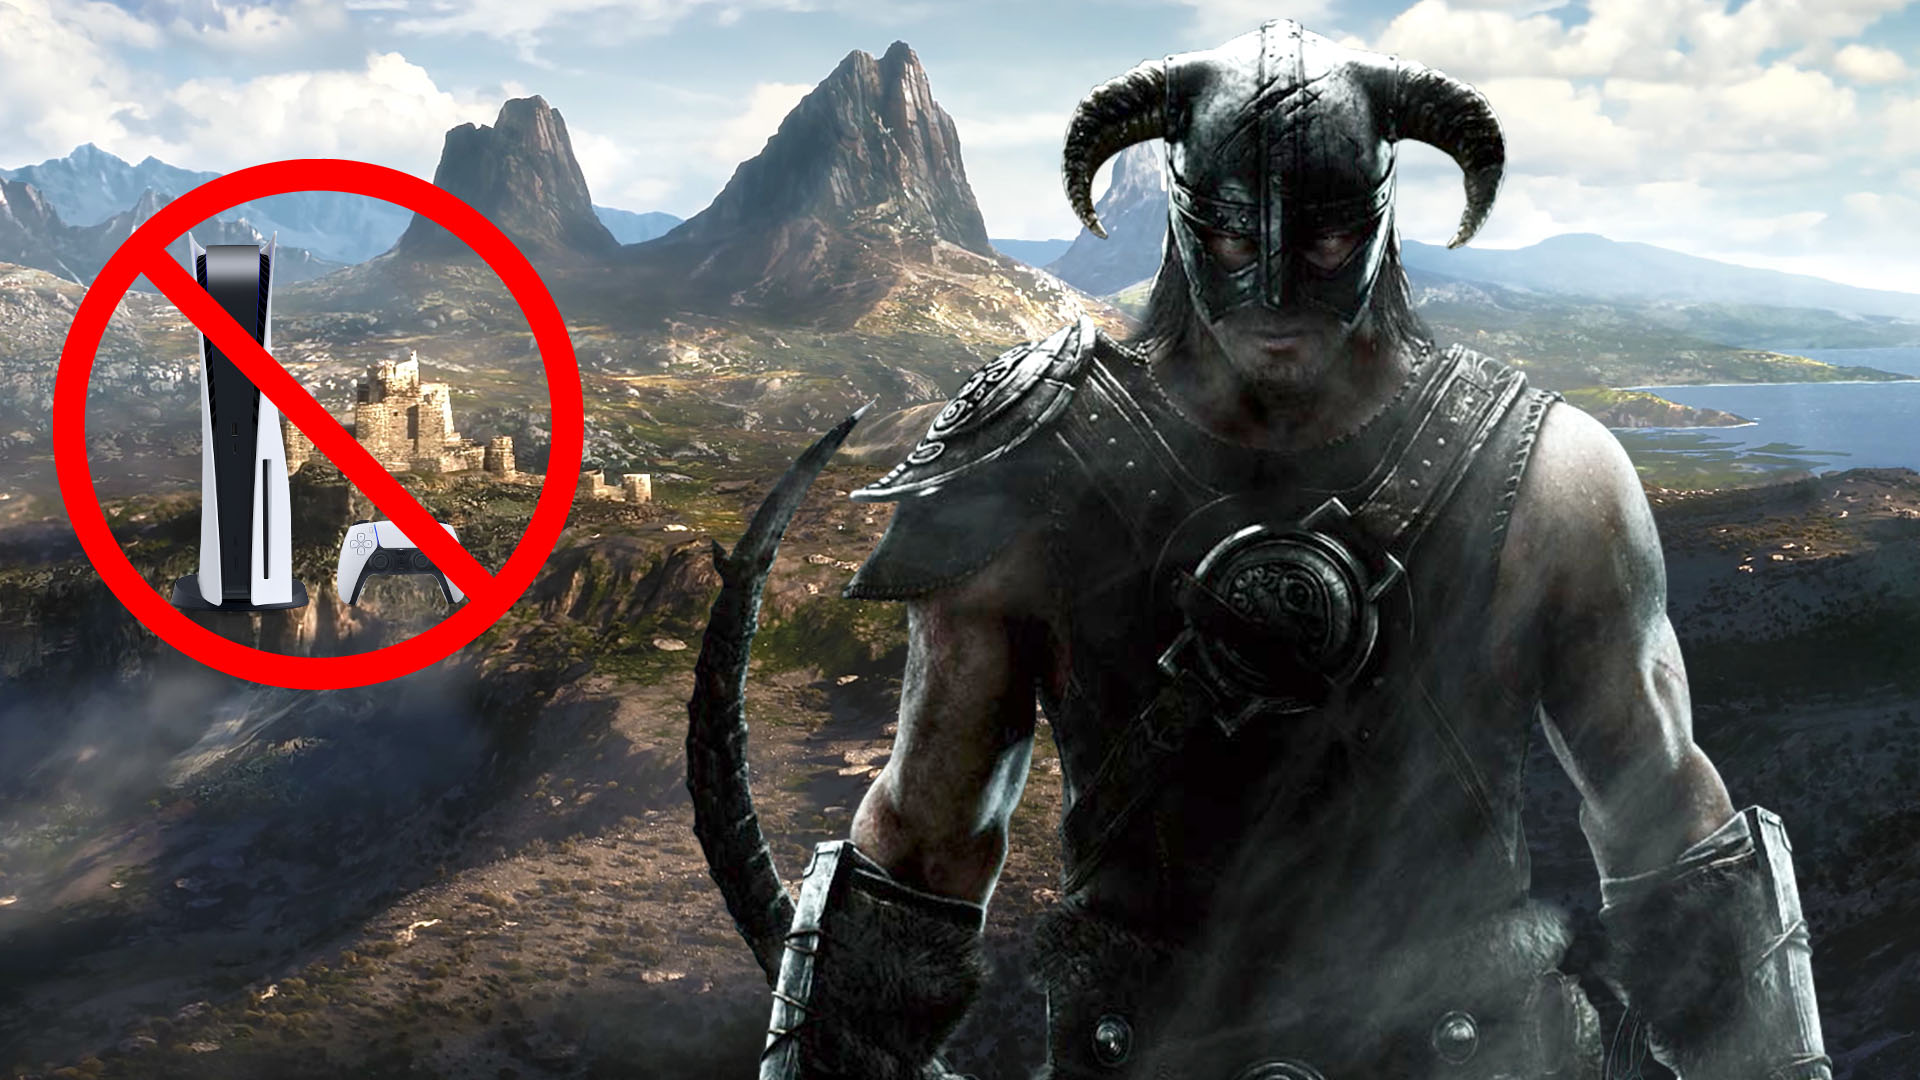 Sony is taking action against Microsoft over the exclusivity of The Elder Scrolls VI on Xbox